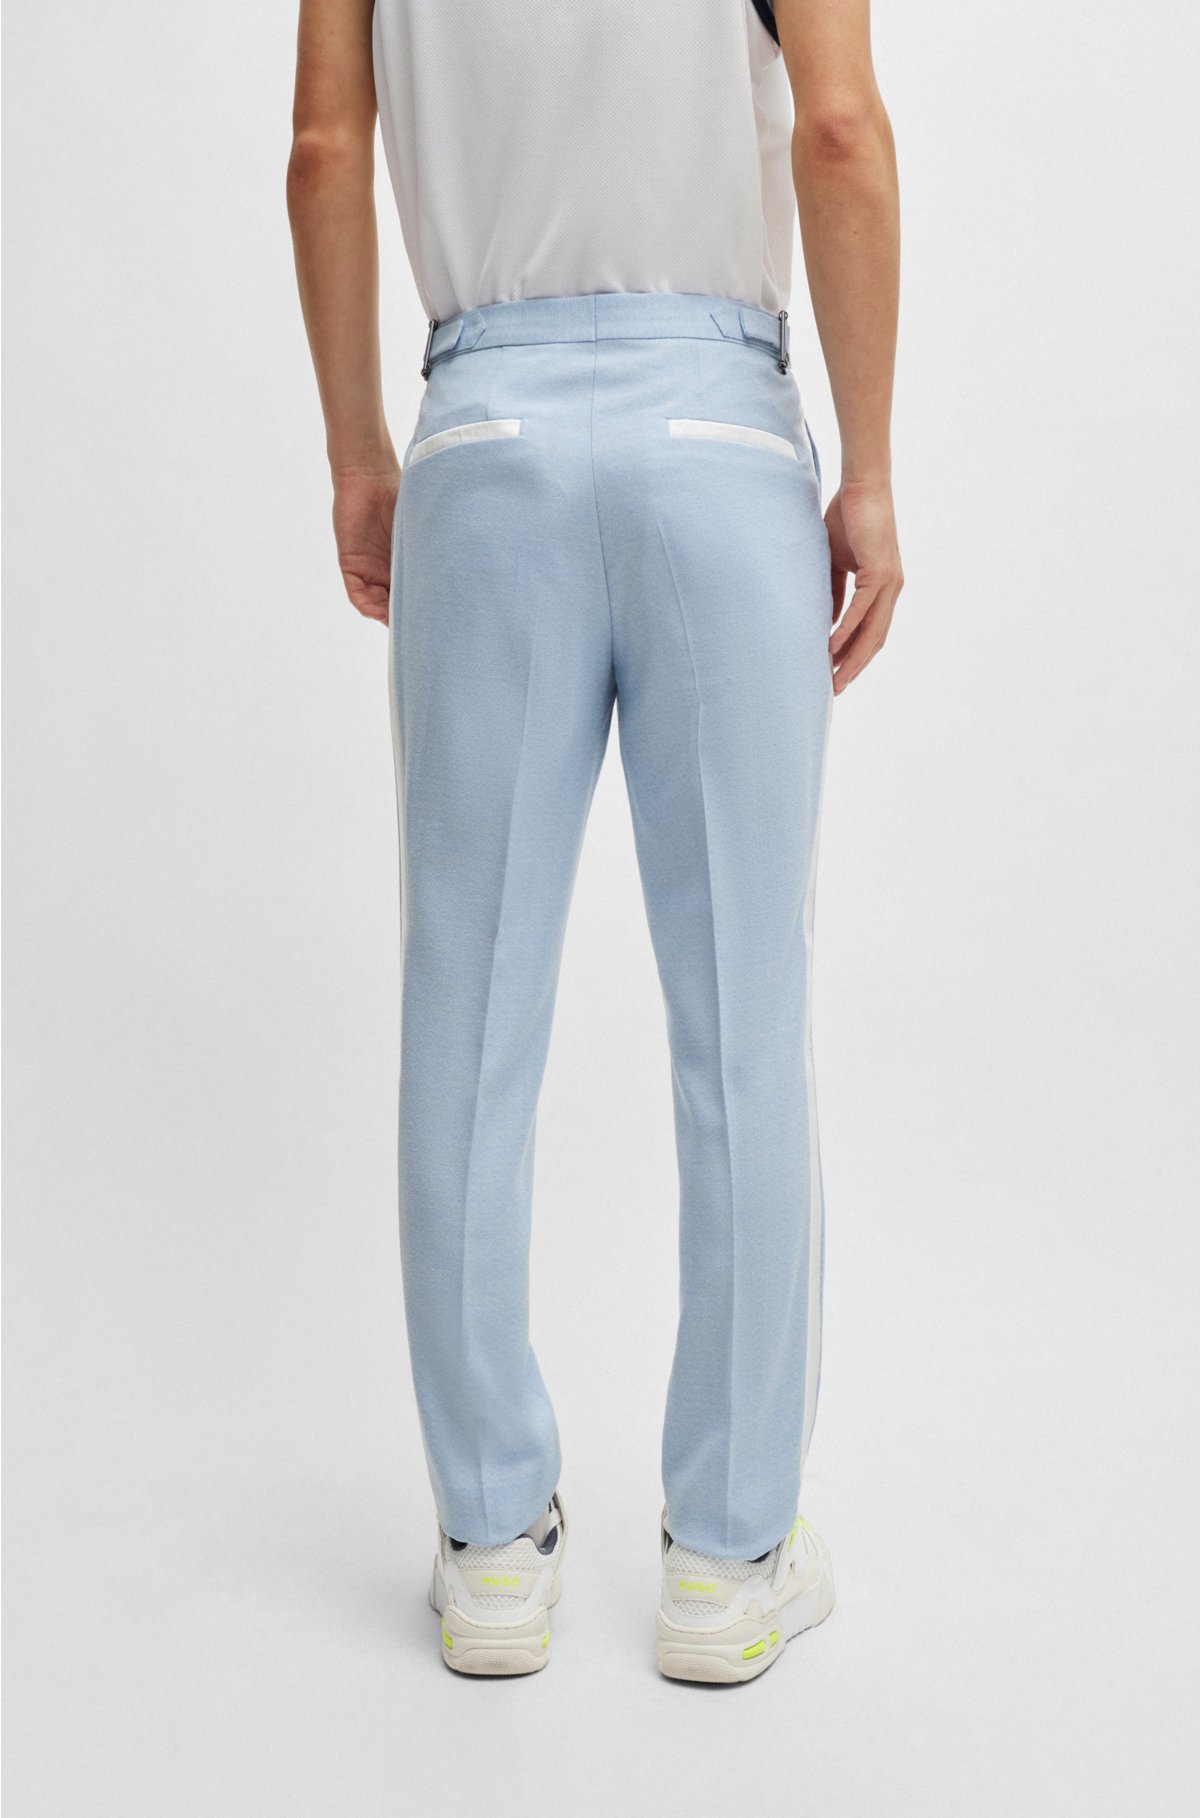 Slim-fit trousers in stretch mouliné fabric, Light Blue